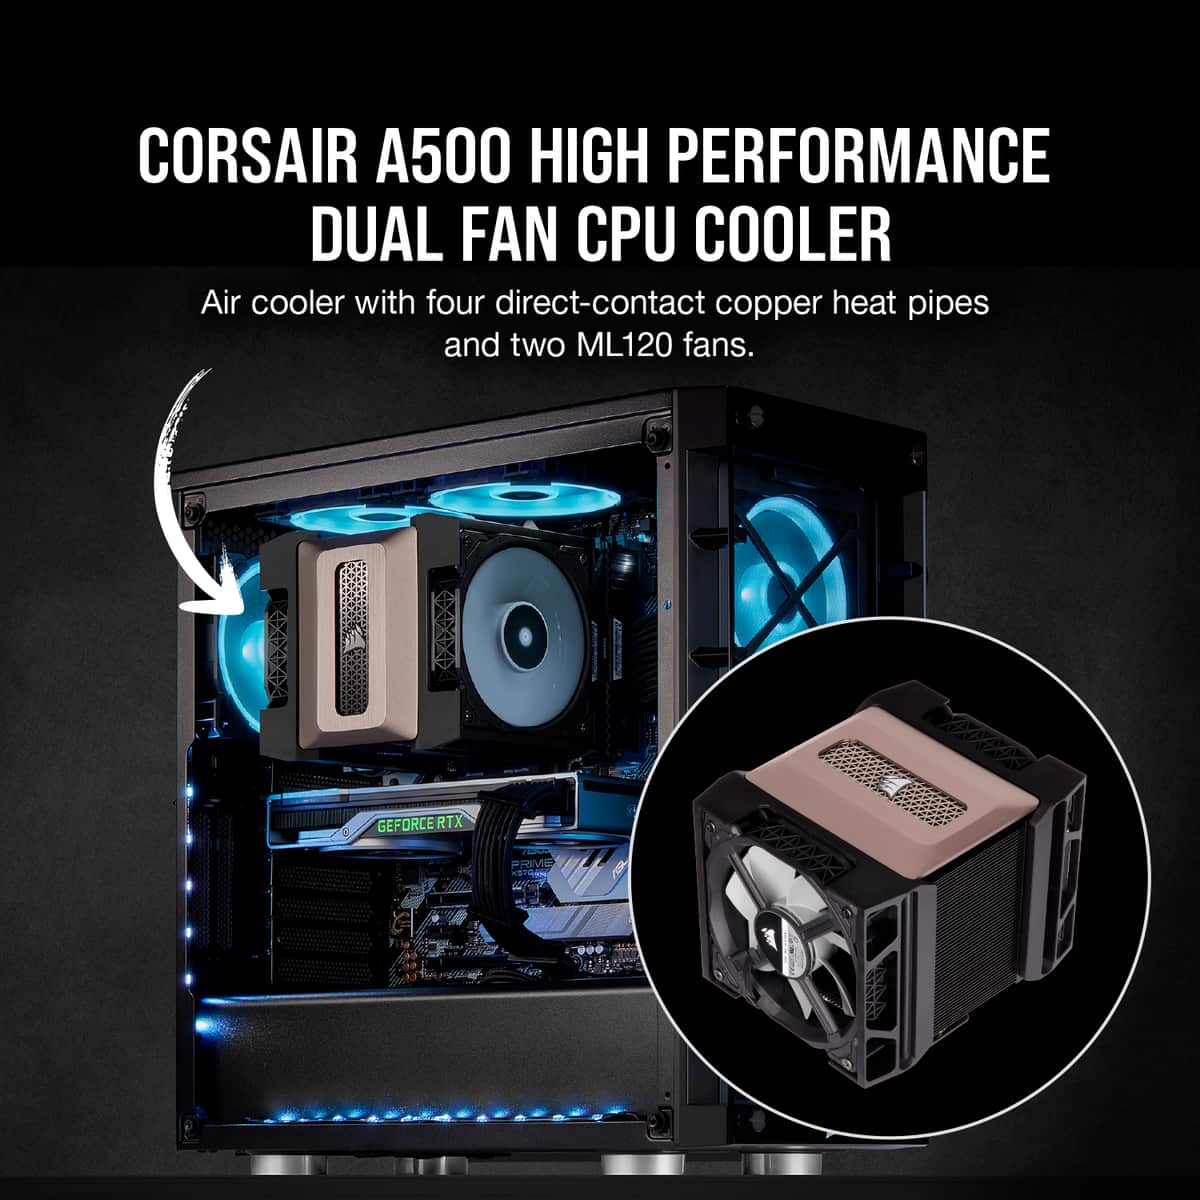 Promotional image of the Corsair A500 CPU cooler that shows a complete PC build featuring it, with a piece of text and an arrow labelling it.